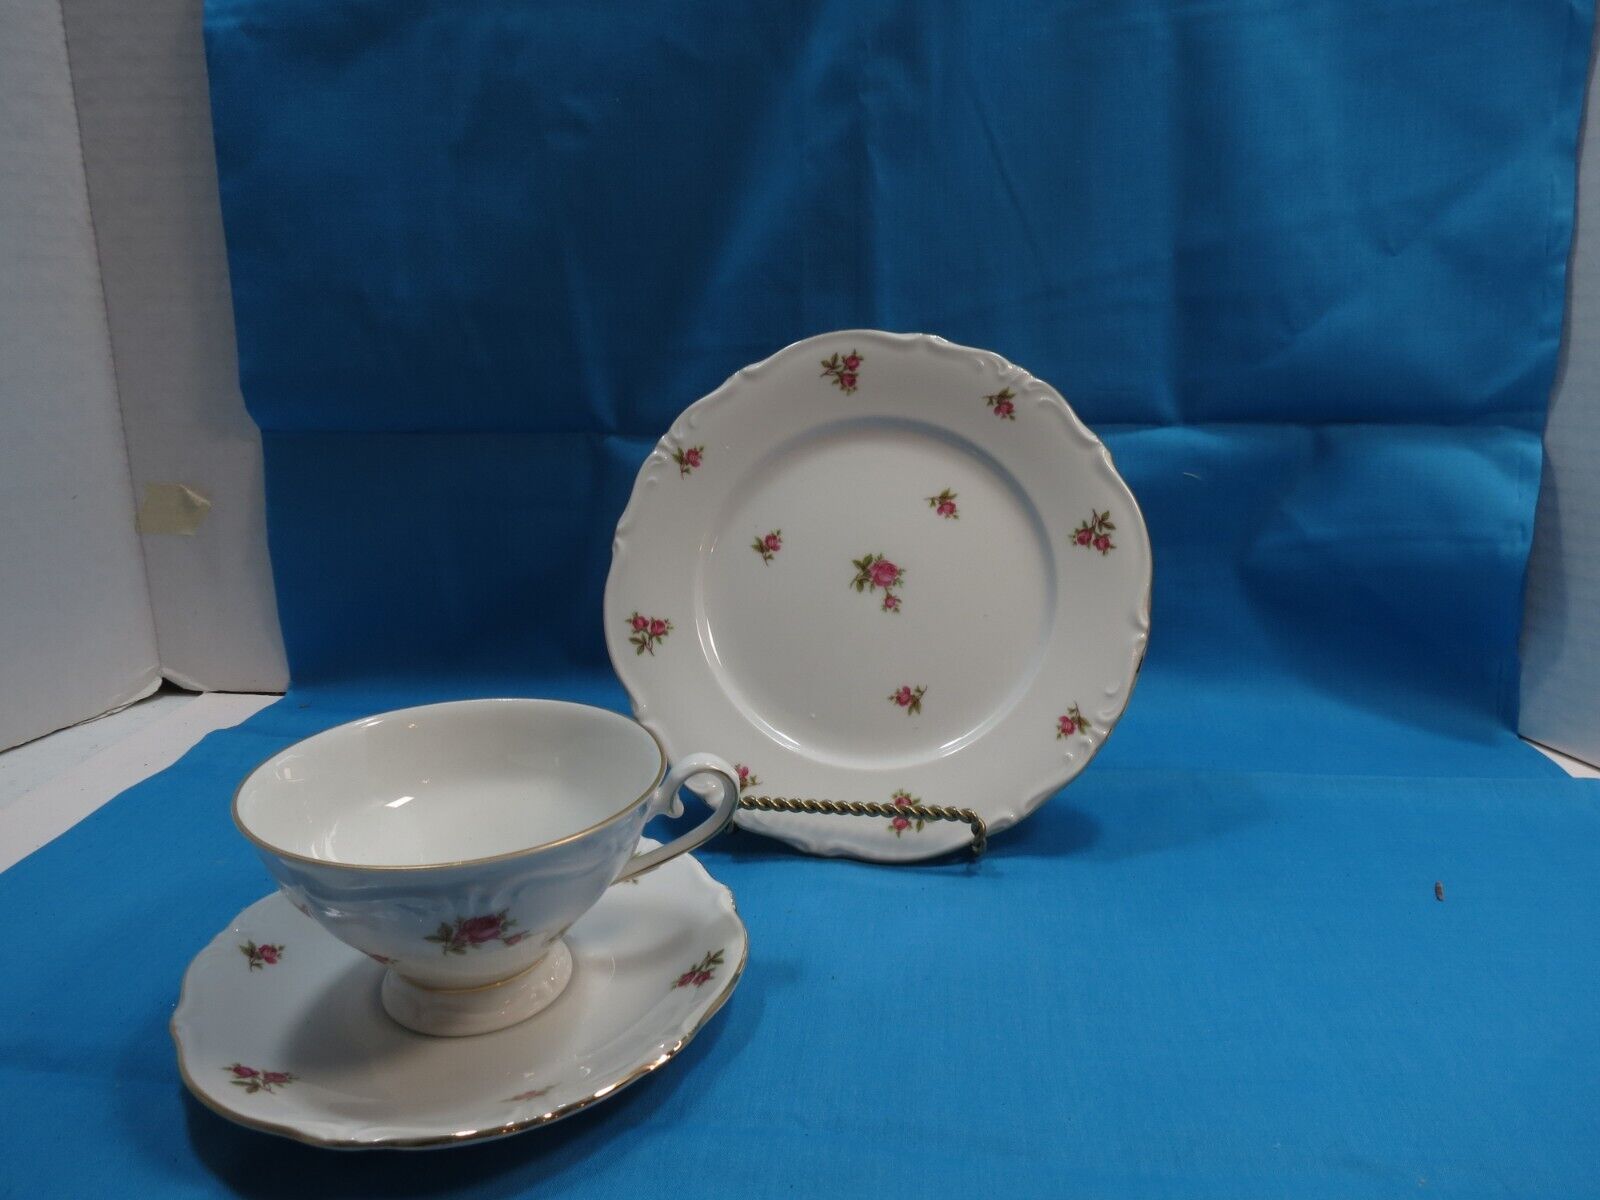 Winterling Mark Leuthen BavariaBONE CHINA PLATE CUP AND SAUCER